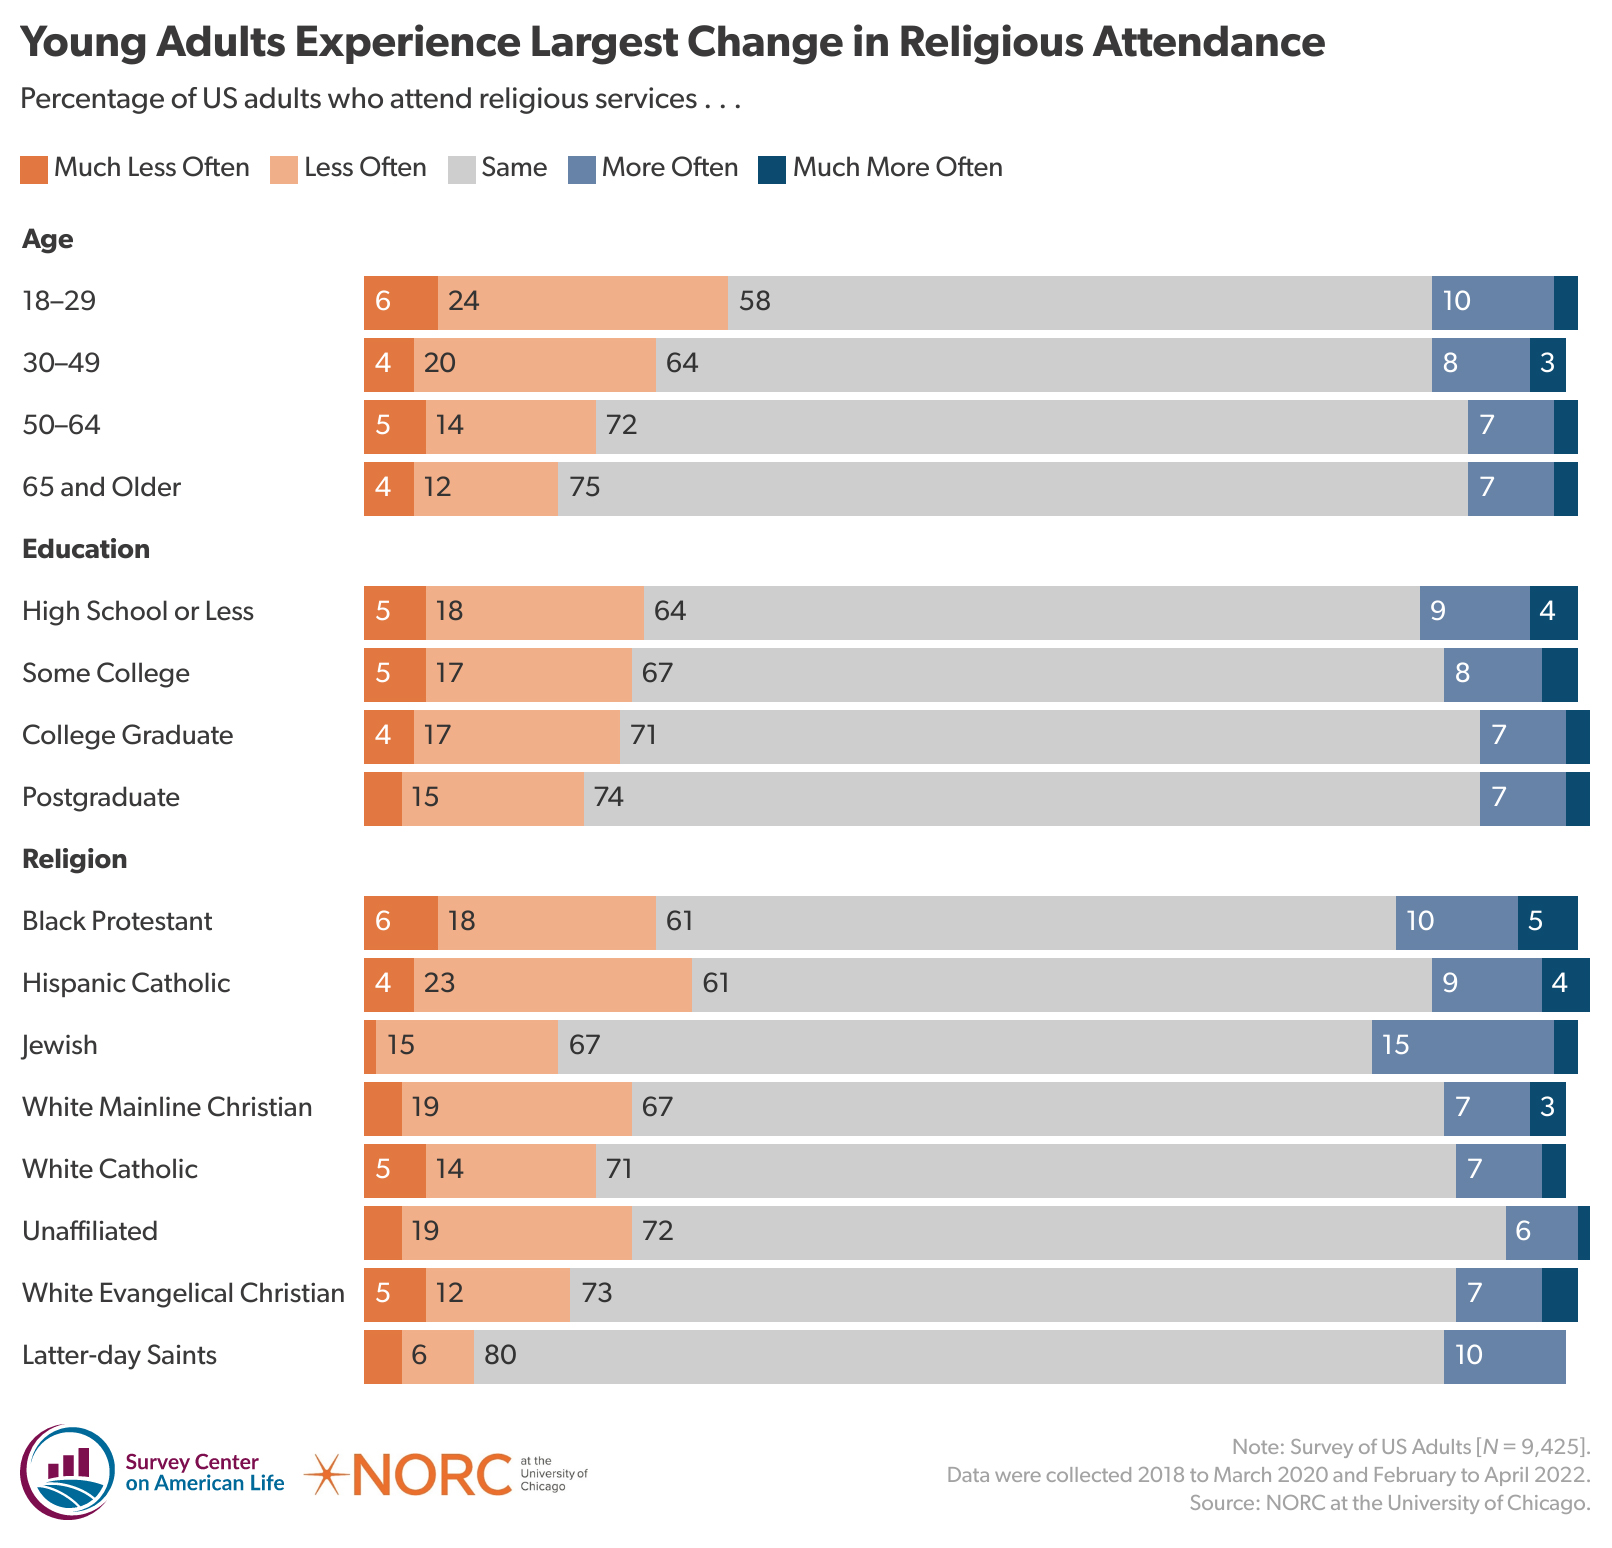 "Young Adults Experience Largest Change in Religious Attendance" Graphic courtesy of American Enterprise Institute